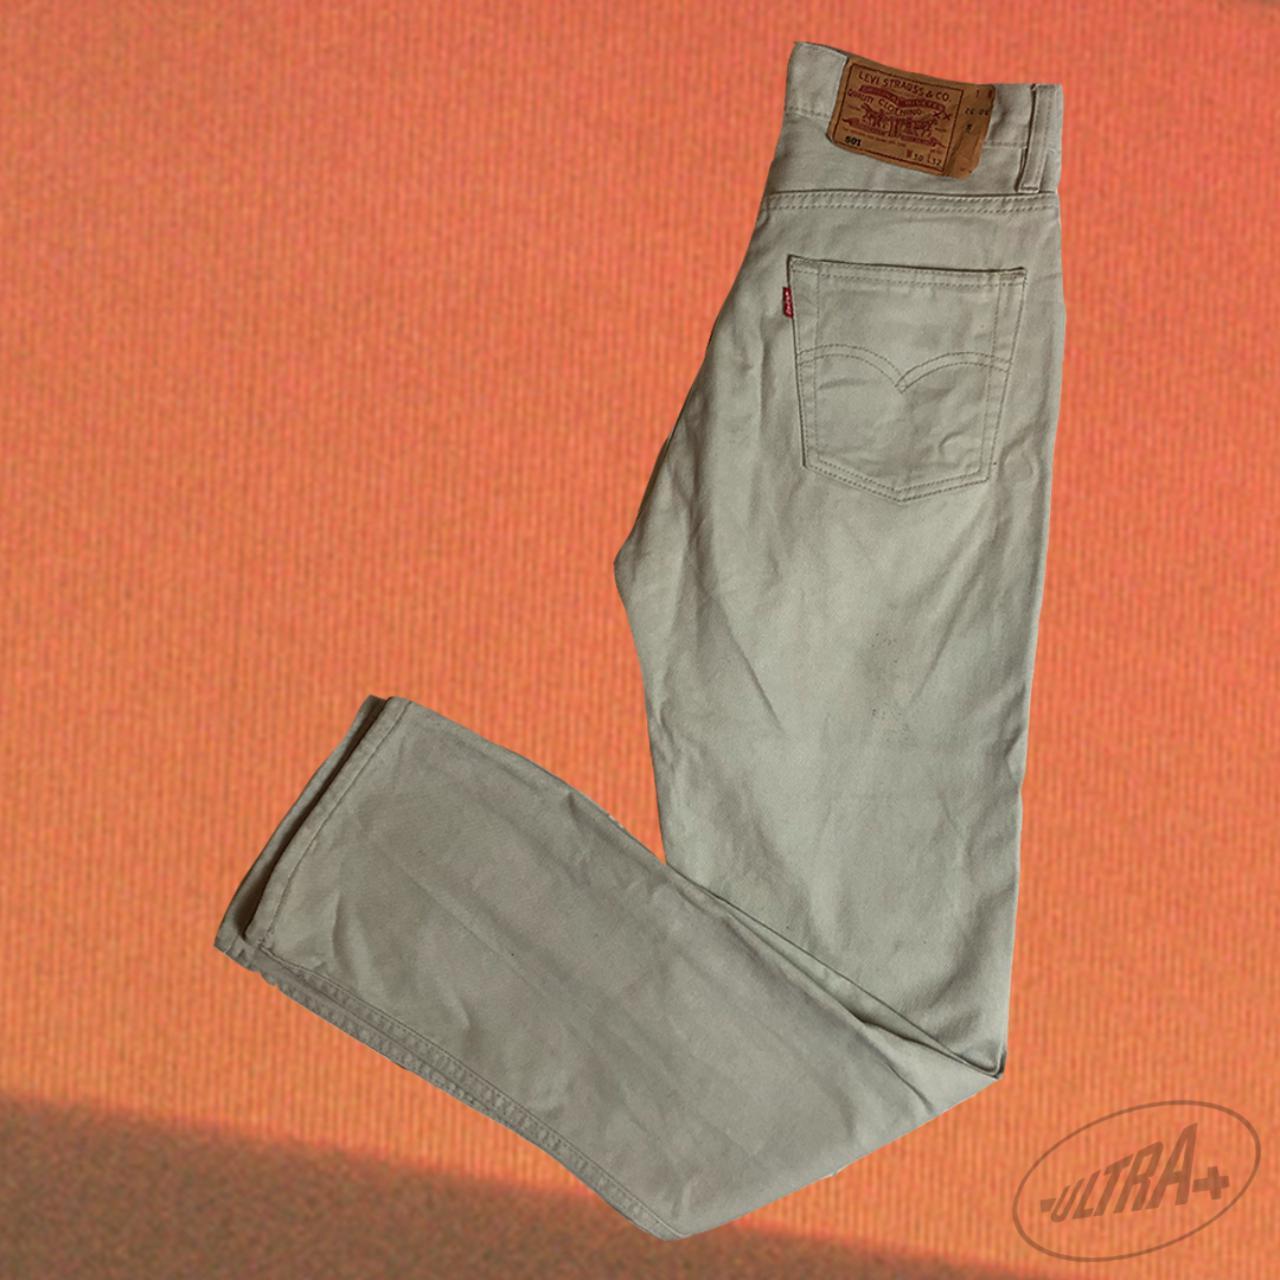 Product Image 1 - Vintage Levi Straus tan jeans.